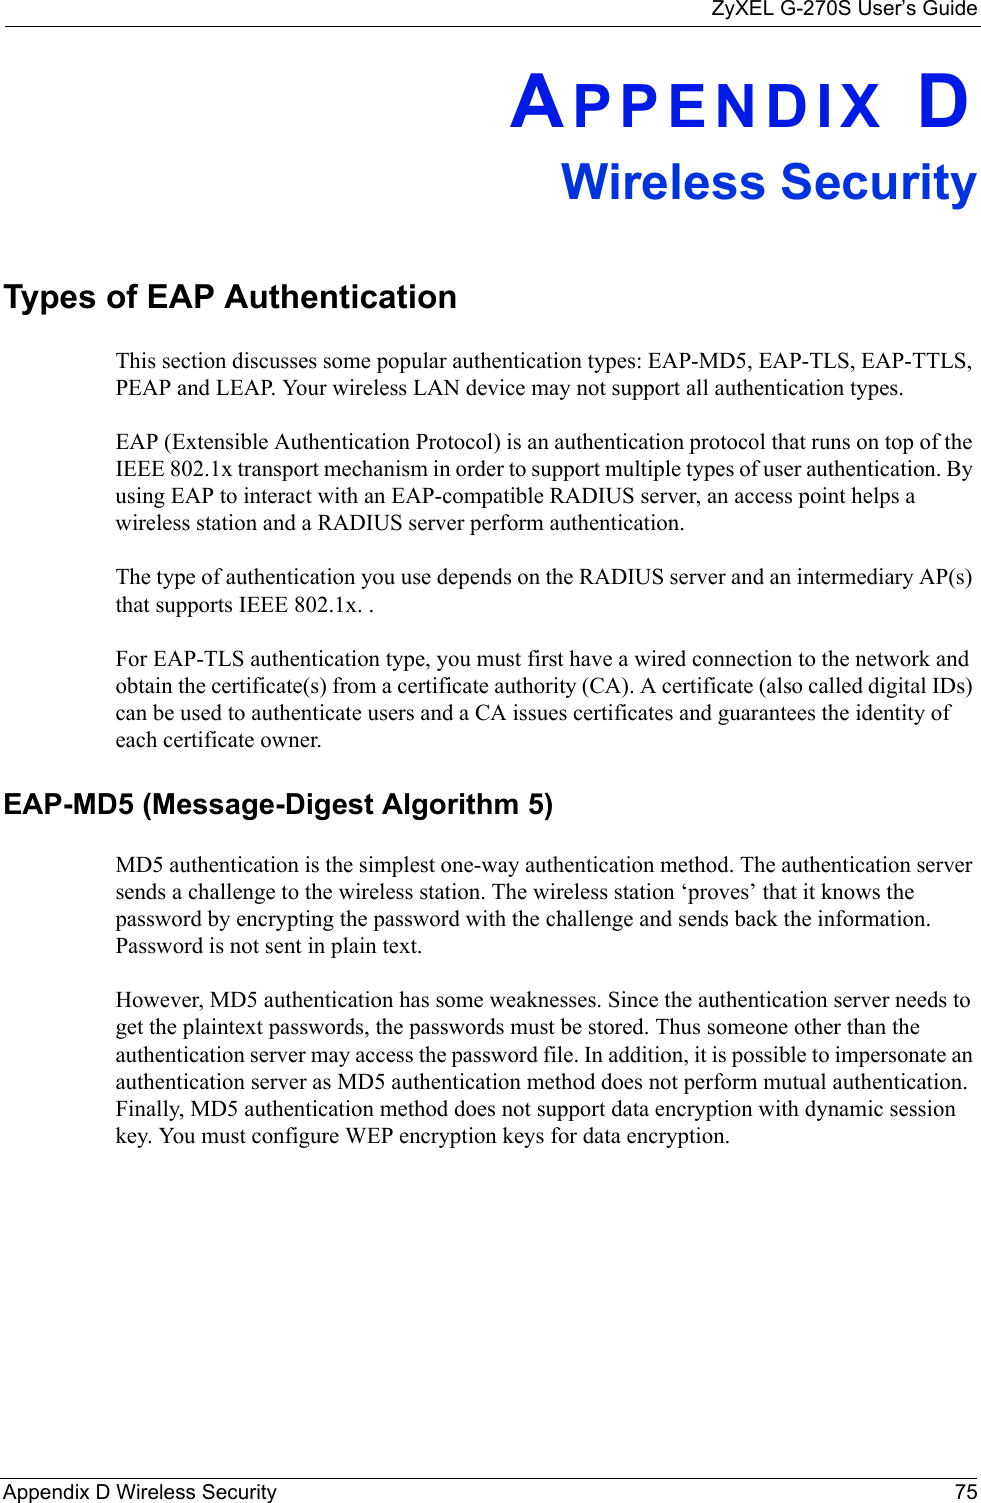 ZyXEL G-270S User’s GuideAppendix D Wireless Security 75APPENDIX DWireless SecurityTypes of EAP AuthenticationThis section discusses some popular authentication types: EAP-MD5, EAP-TLS, EAP-TTLS, PEAP and LEAP. Your wireless LAN device may not support all authentication types. EAP (Extensible Authentication Protocol) is an authentication protocol that runs on top of the IEEE 802.1x transport mechanism in order to support multiple types of user authentication. By using EAP to interact with an EAP-compatible RADIUS server, an access point helps a wireless station and a RADIUS server perform authentication. The type of authentication you use depends on the RADIUS server and an intermediary AP(s) that supports IEEE 802.1x. .For EAP-TLS authentication type, you must first have a wired connection to the network and obtain the certificate(s) from a certificate authority (CA). A certificate (also called digital IDs) can be used to authenticate users and a CA issues certificates and guarantees the identity of each certificate owner.EAP-MD5 (Message-Digest Algorithm 5)MD5 authentication is the simplest one-way authentication method. The authentication server sends a challenge to the wireless station. The wireless station ‘proves’ that it knows the password by encrypting the password with the challenge and sends back the information. Password is not sent in plain text. However, MD5 authentication has some weaknesses. Since the authentication server needs to get the plaintext passwords, the passwords must be stored. Thus someone other than the authentication server may access the password file. In addition, it is possible to impersonate an authentication server as MD5 authentication method does not perform mutual authentication. Finally, MD5 authentication method does not support data encryption with dynamic session key. You must configure WEP encryption keys for data encryption. 